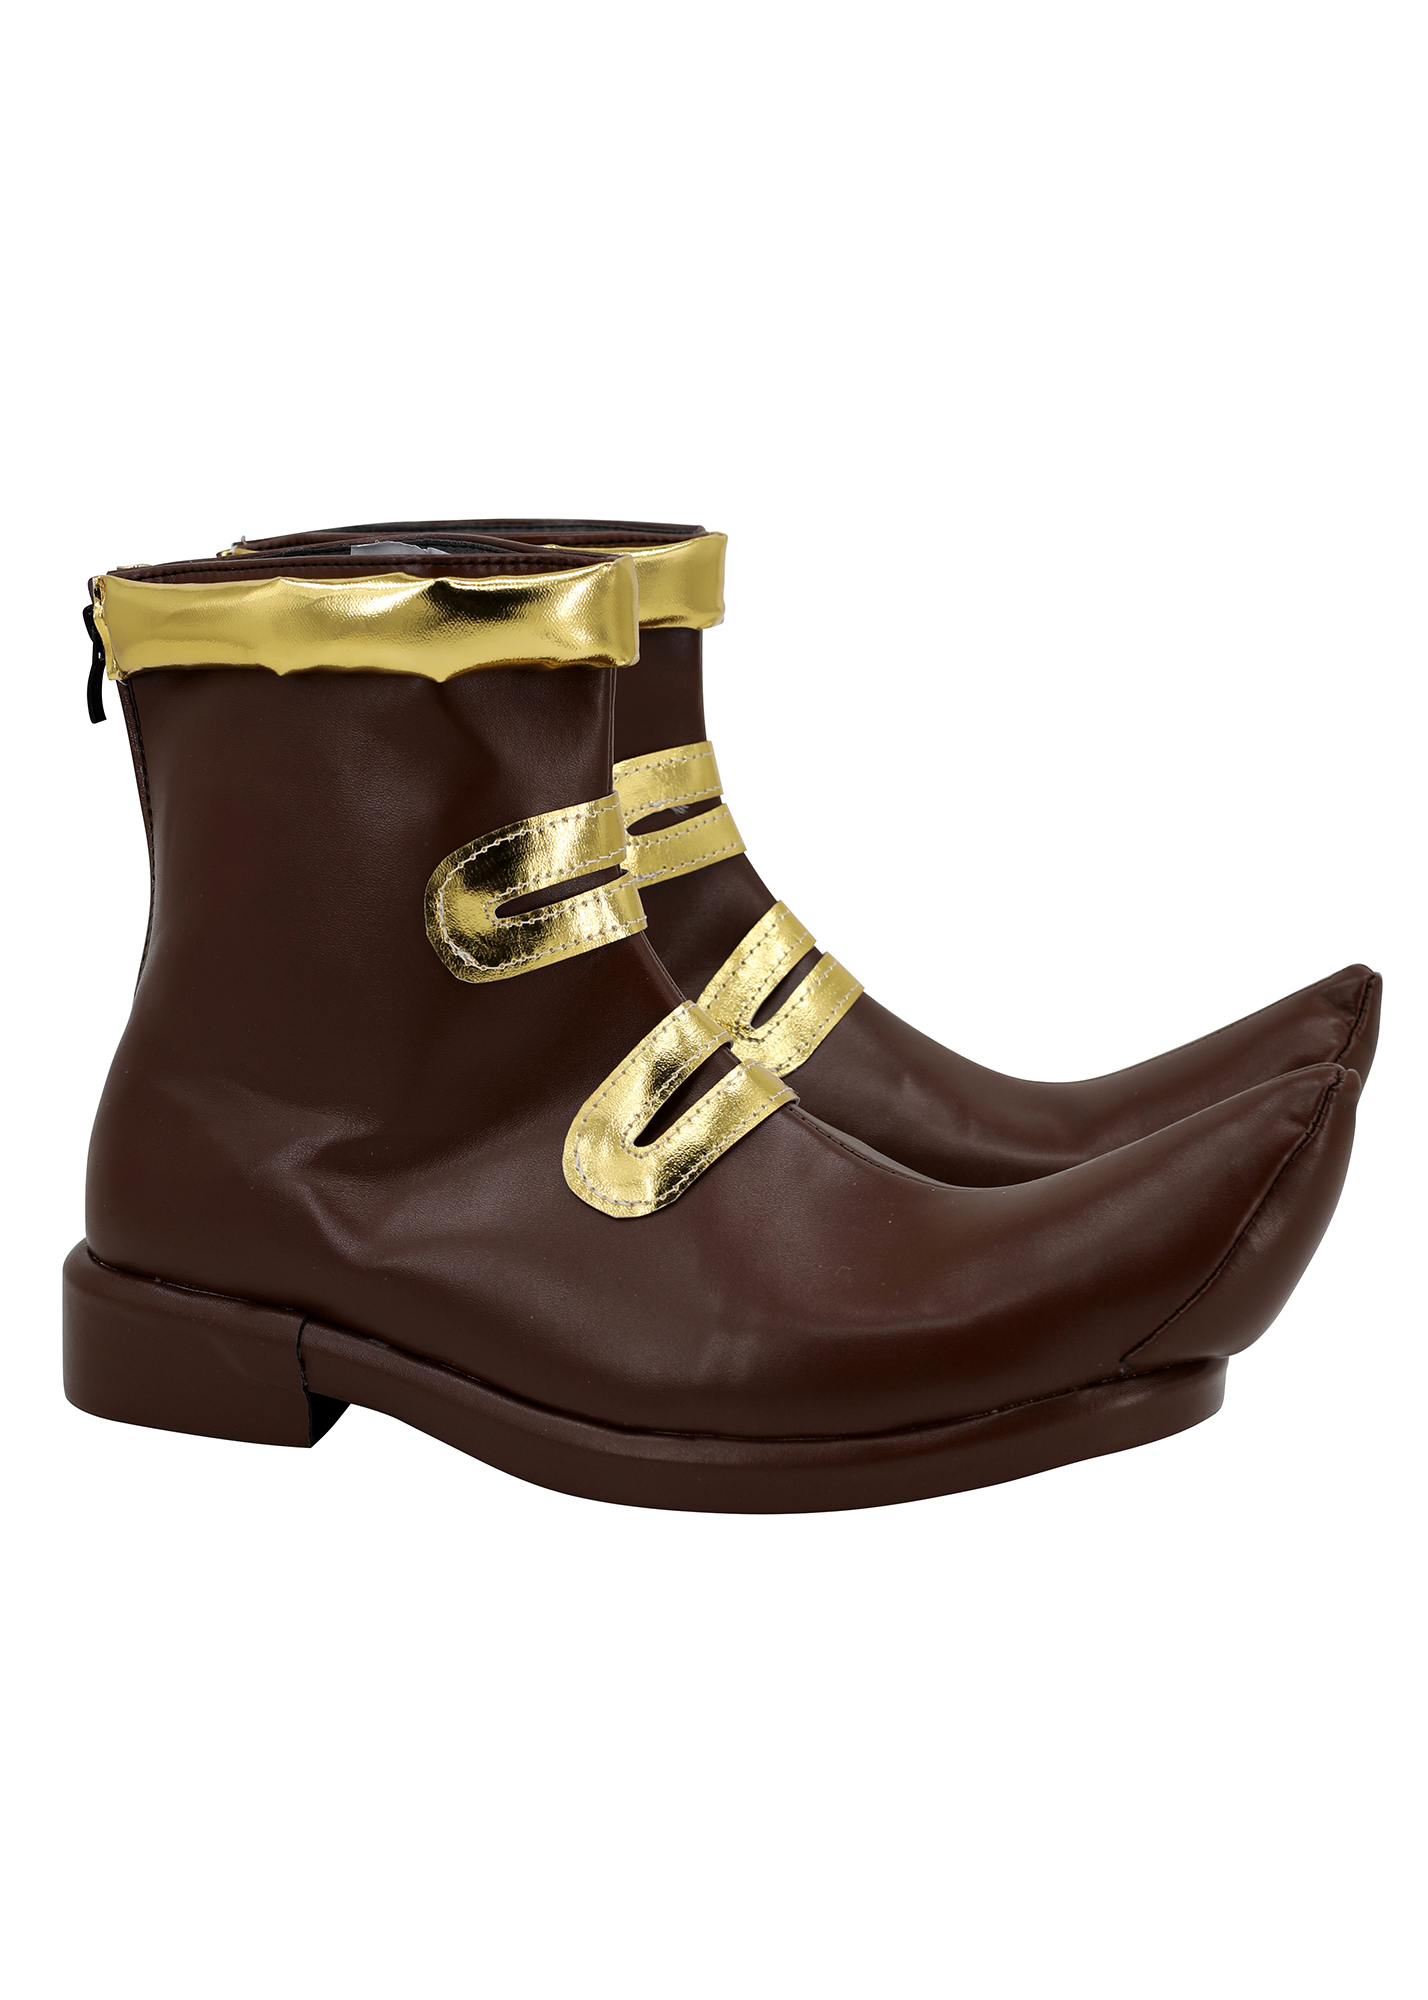 One Piece Shoes Men Buggy Boots Cosplay